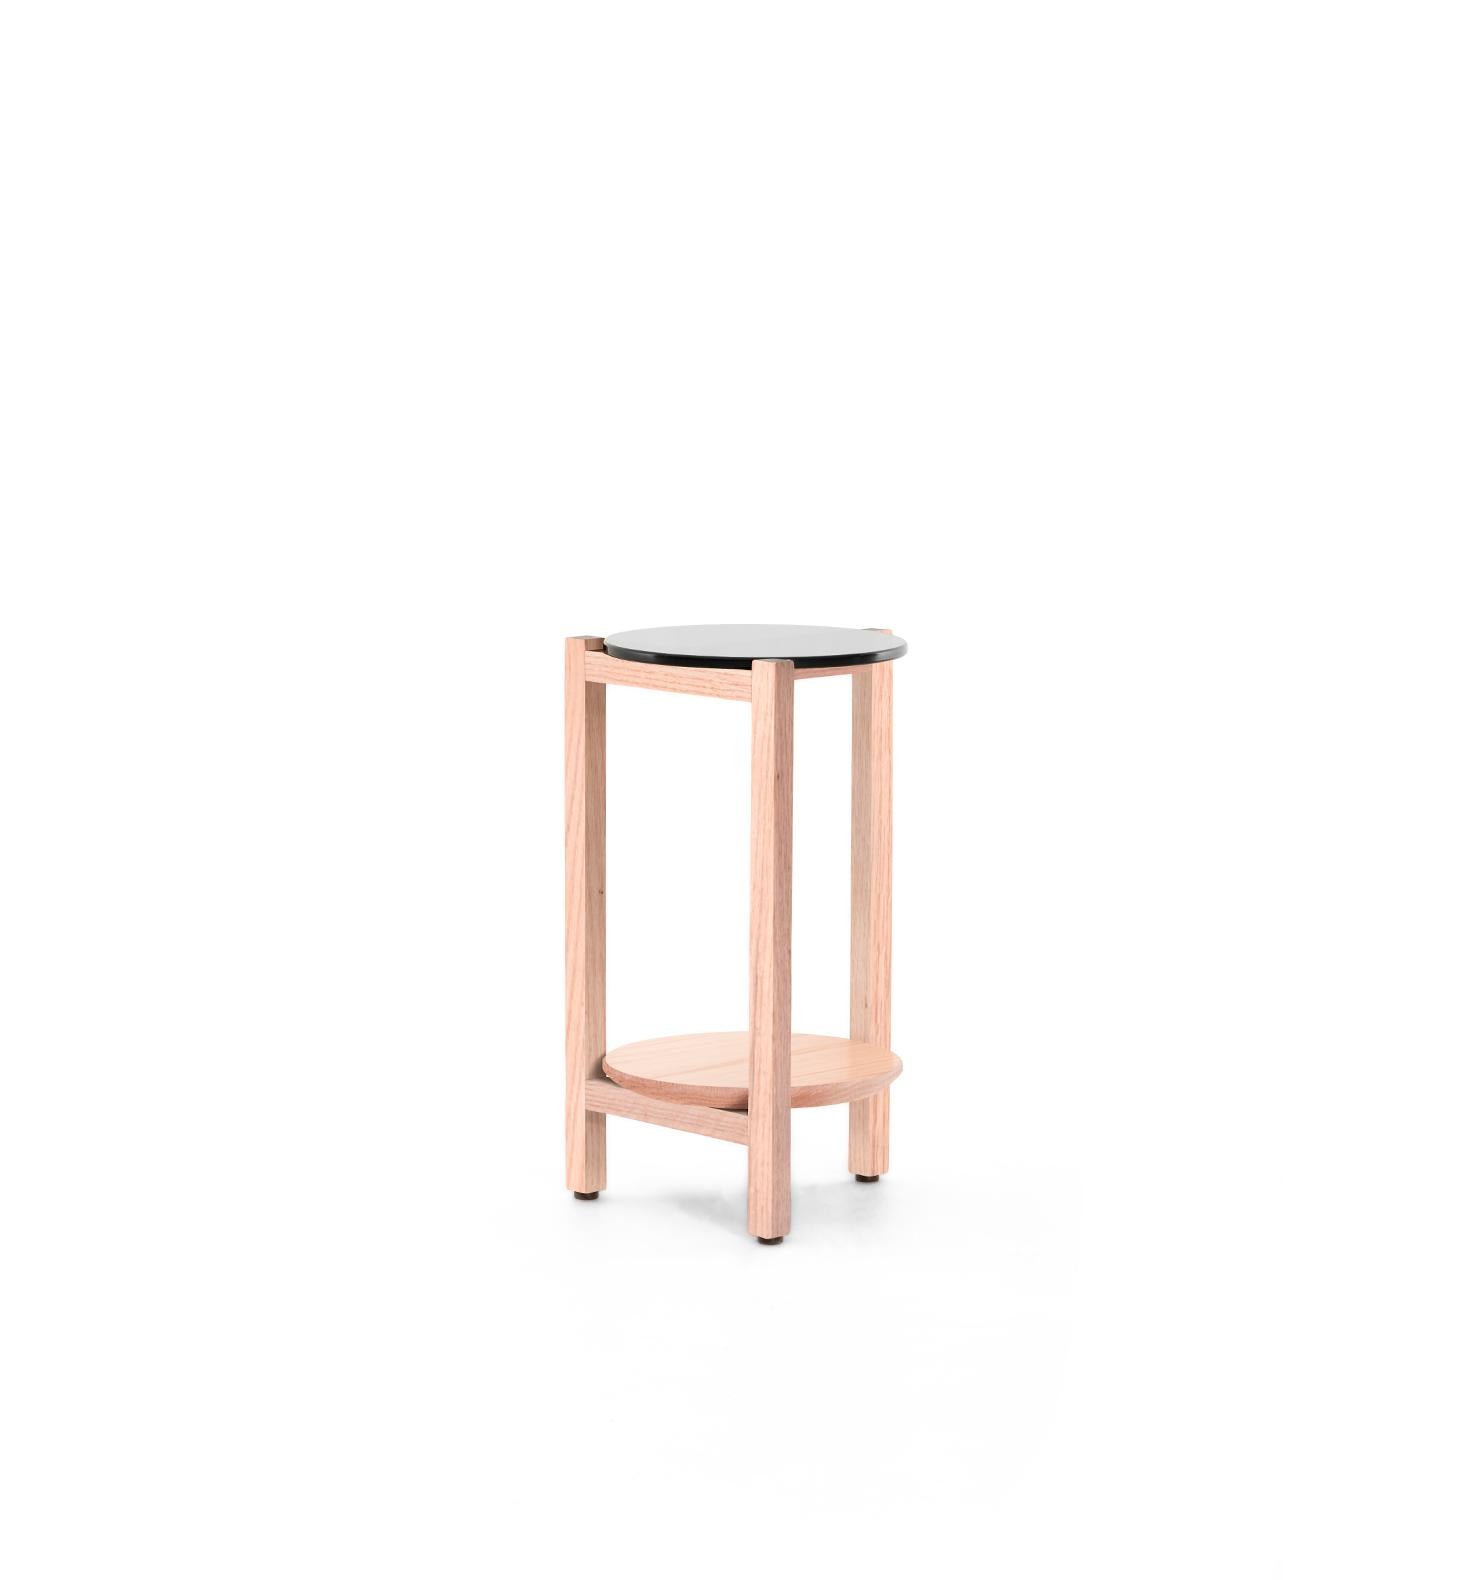 Introducing the Dedo B, Mexican contemporary side table designed by Emiliano Molina for CUCHARA. These tables are part of our DEDO Side Table collection, where beauty lies in their usefulness. As practical as they are simple, each table integrates a